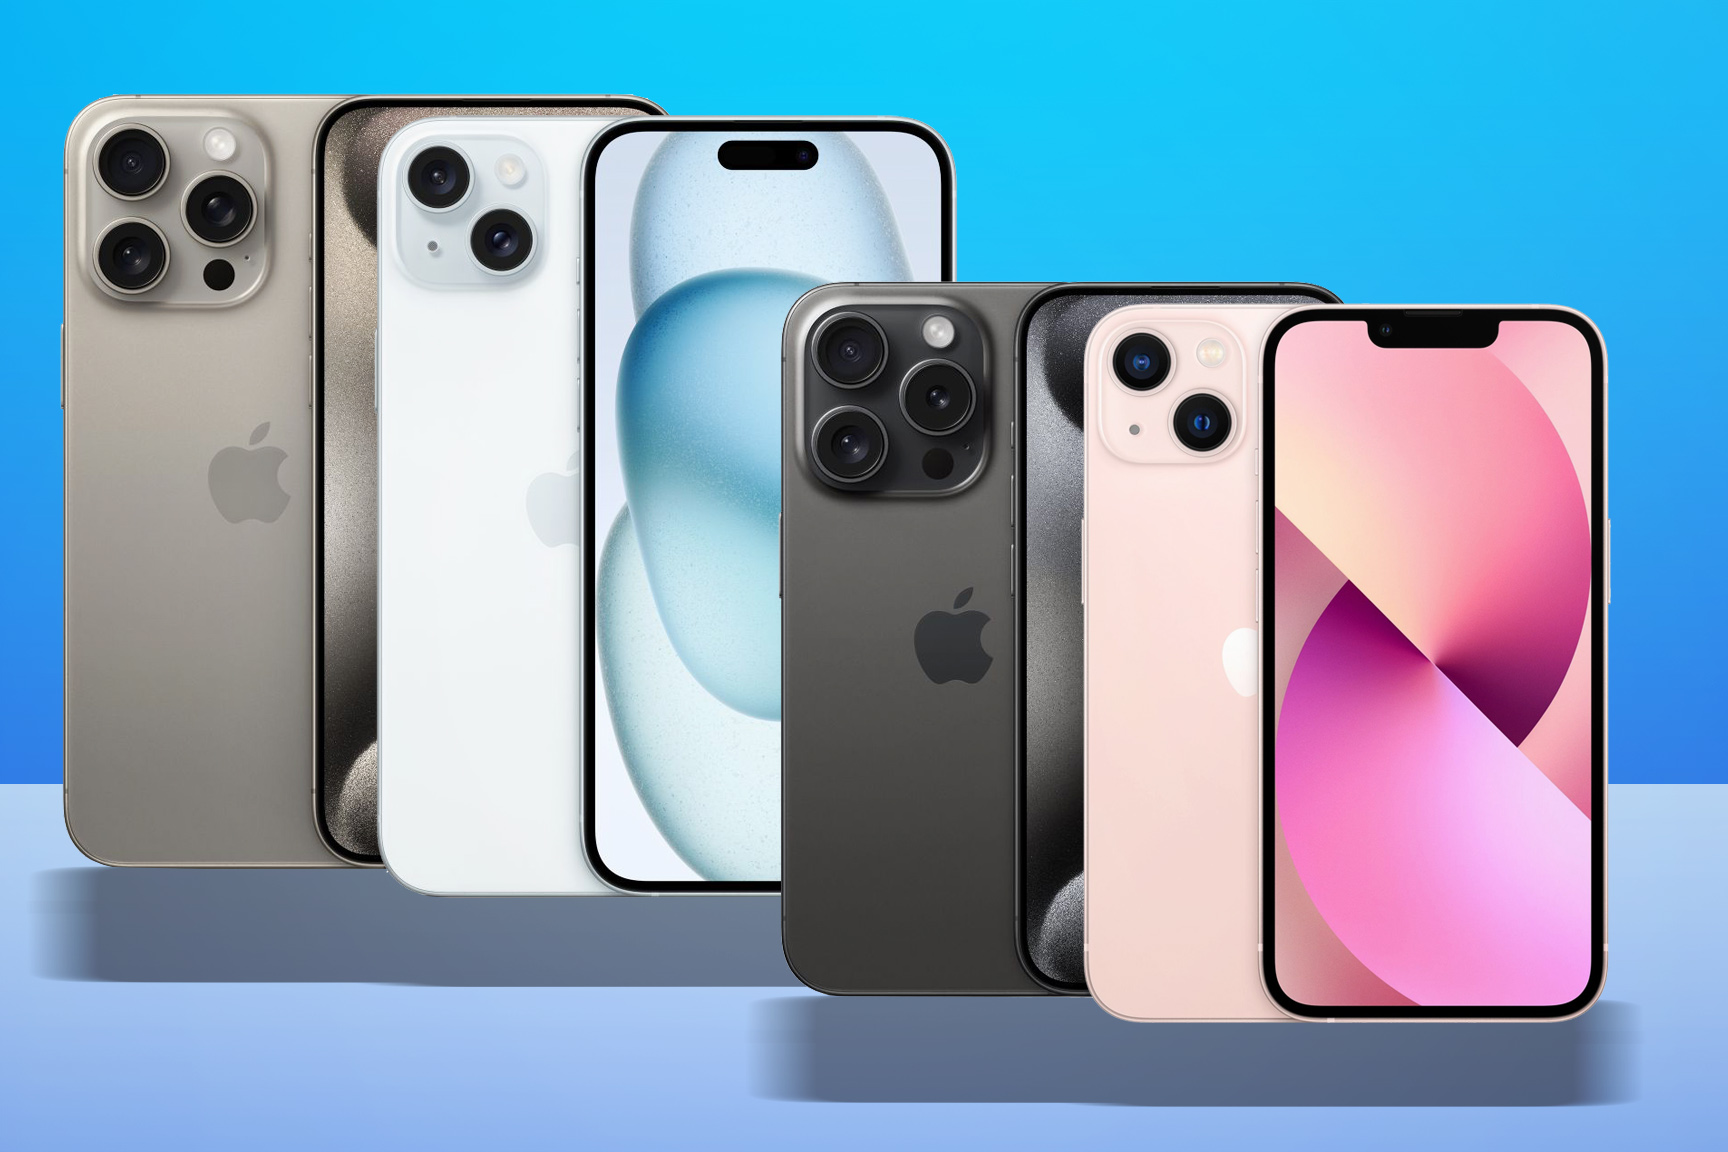 If you have an iPhone 8 or iPhone X, you should probably sell it now